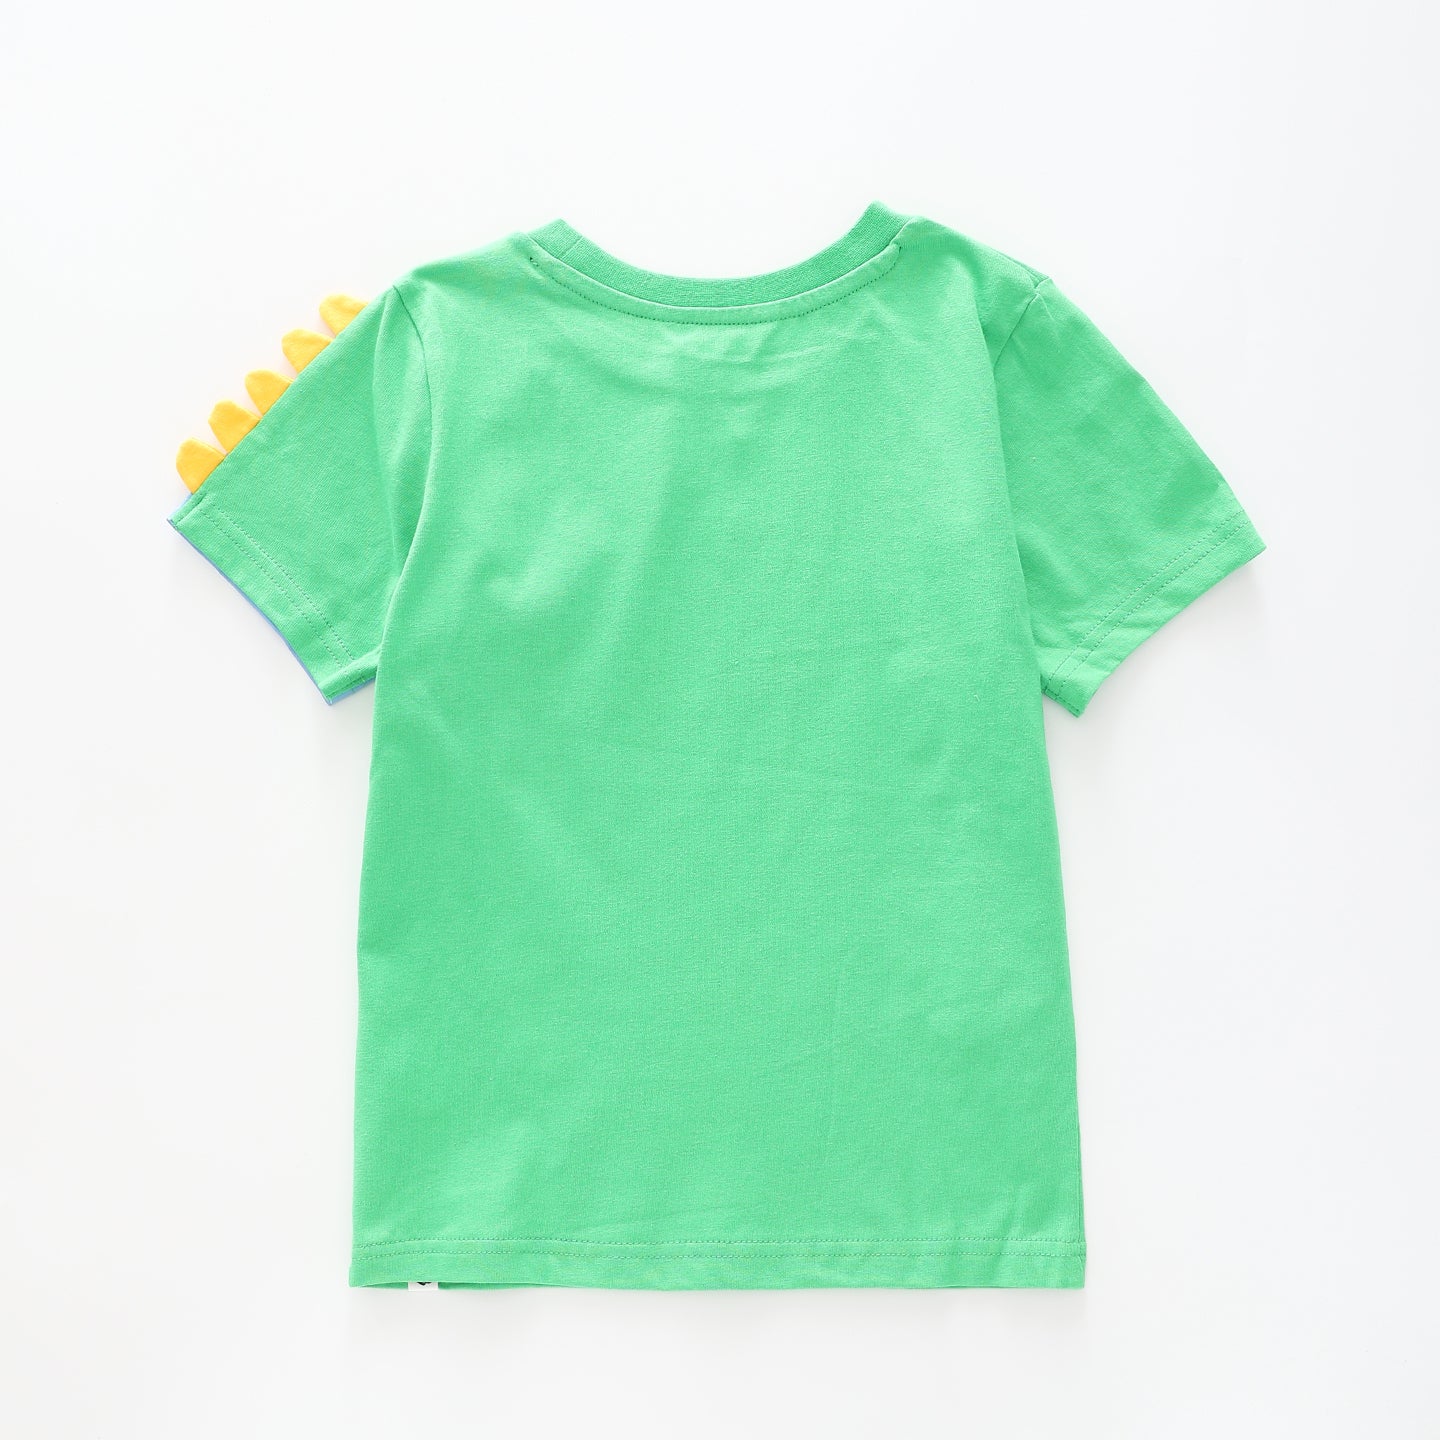 Boy's Green and Blue T-shirt With Dinosaur Print